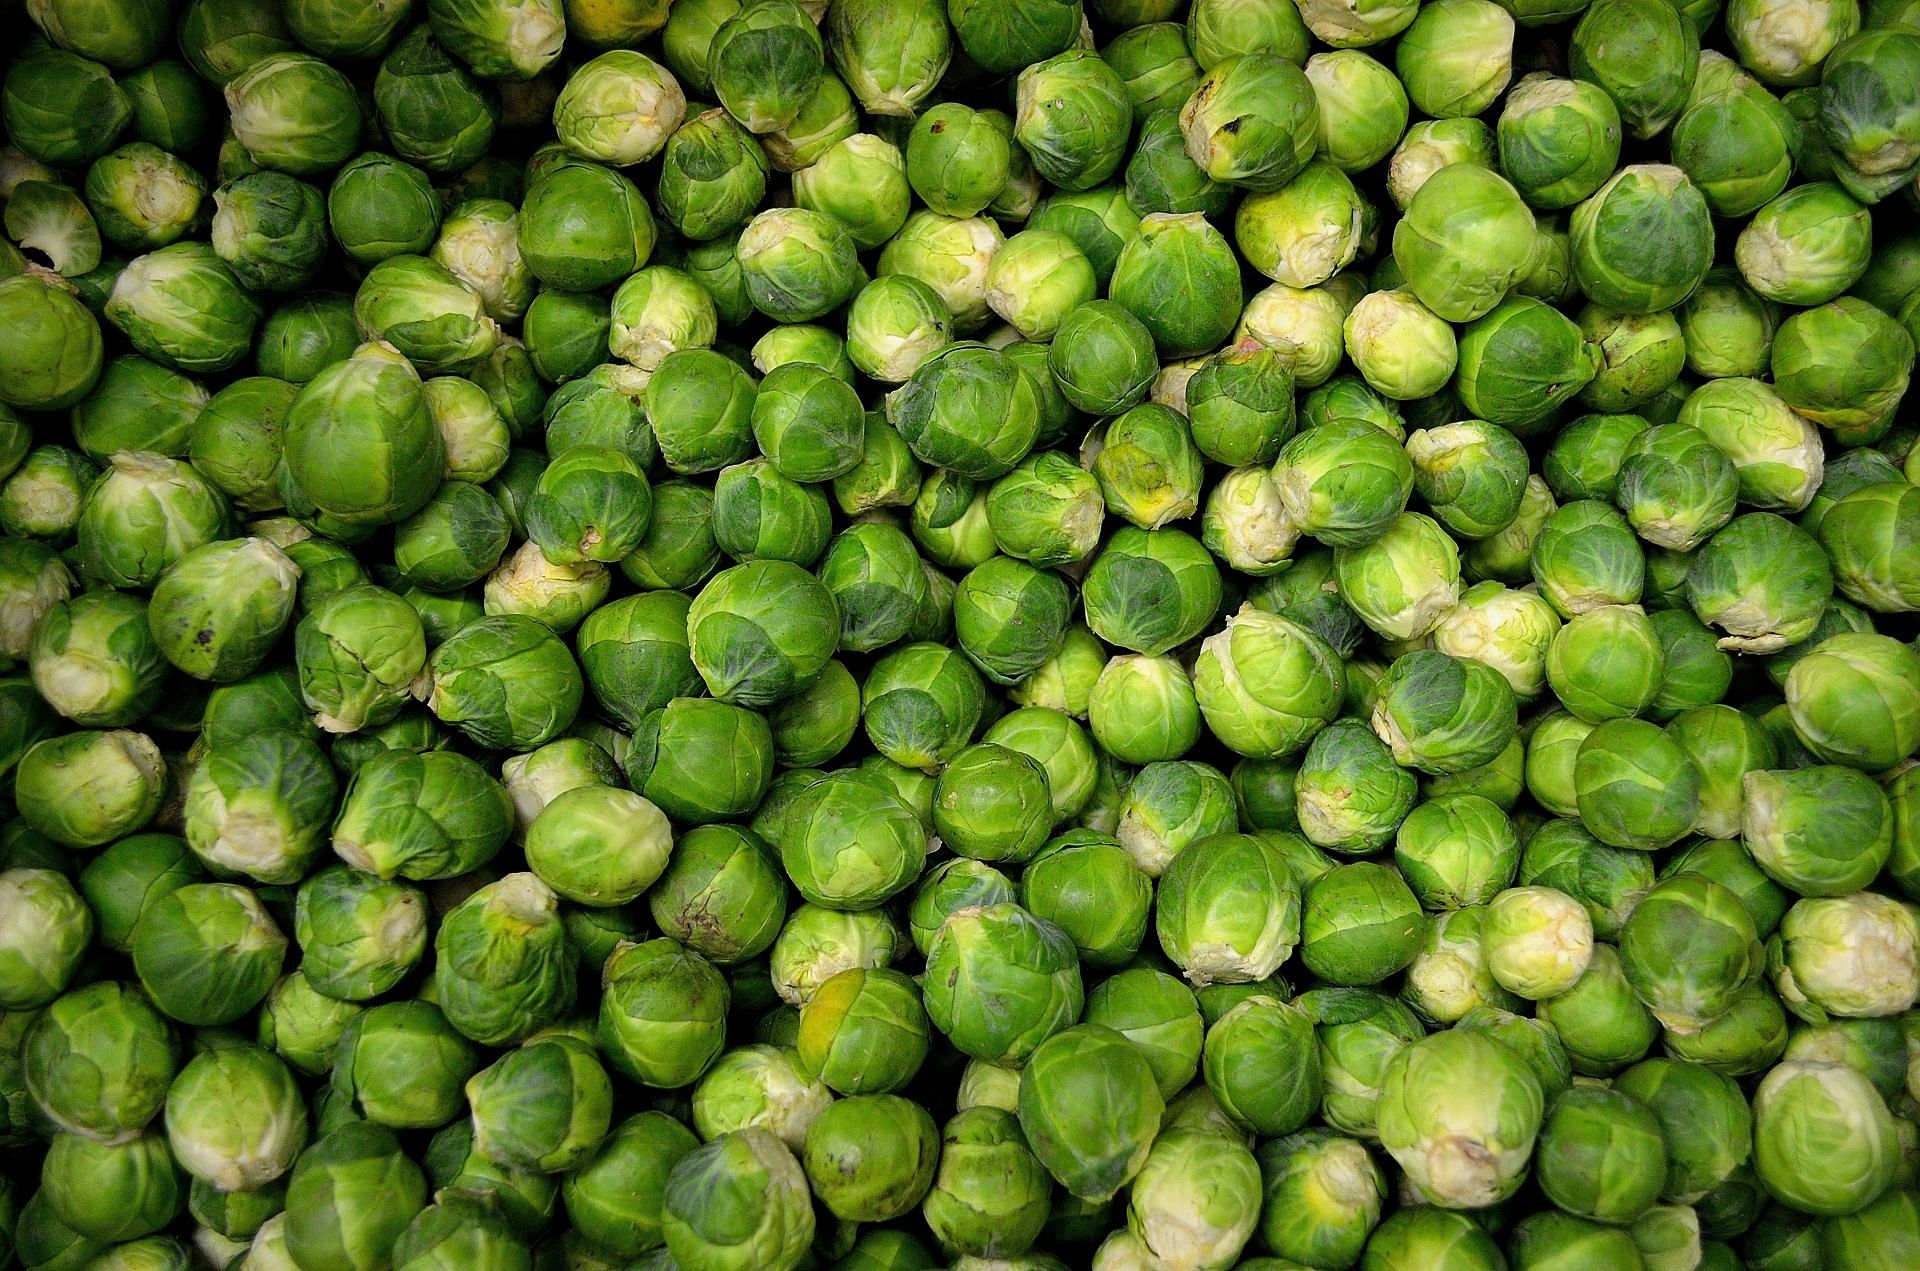 10 Surprising Benefits of Brussels Sprouts You Need to Know (Image via Pexels)